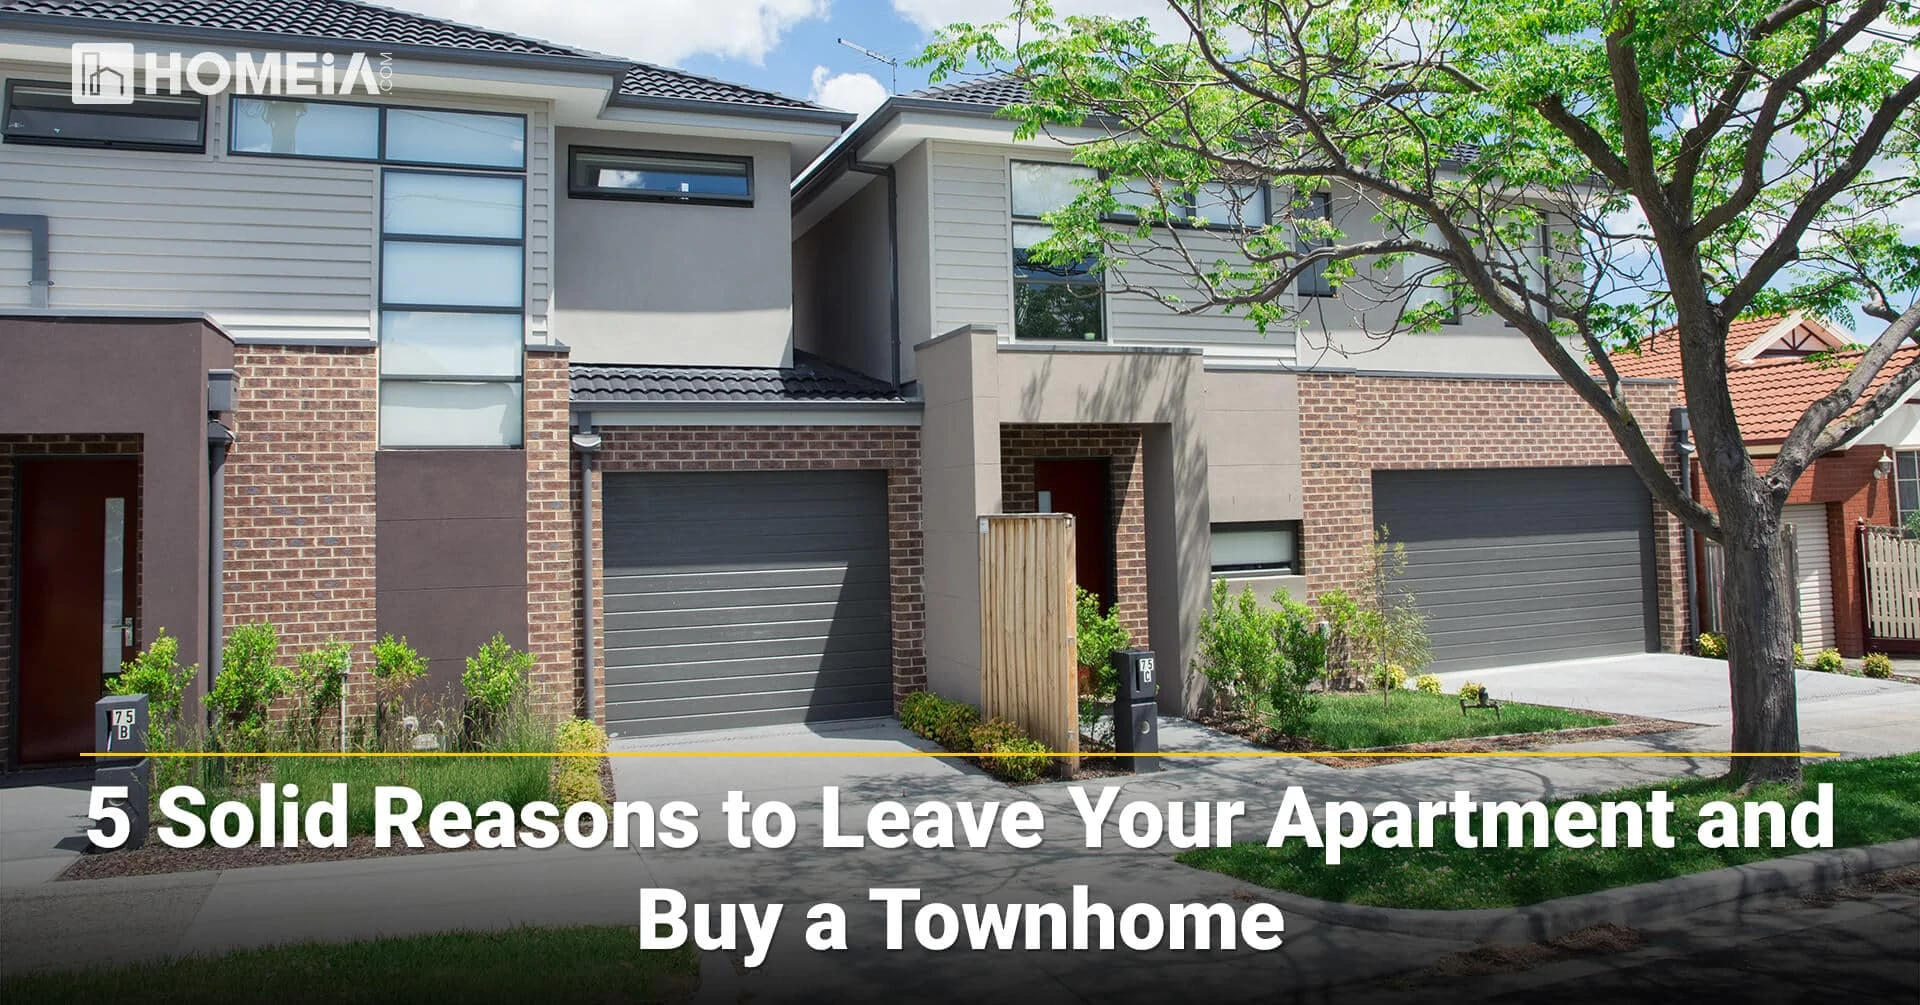 5 Solid Reasons to Leave Your Apartment and Buy a Townhome